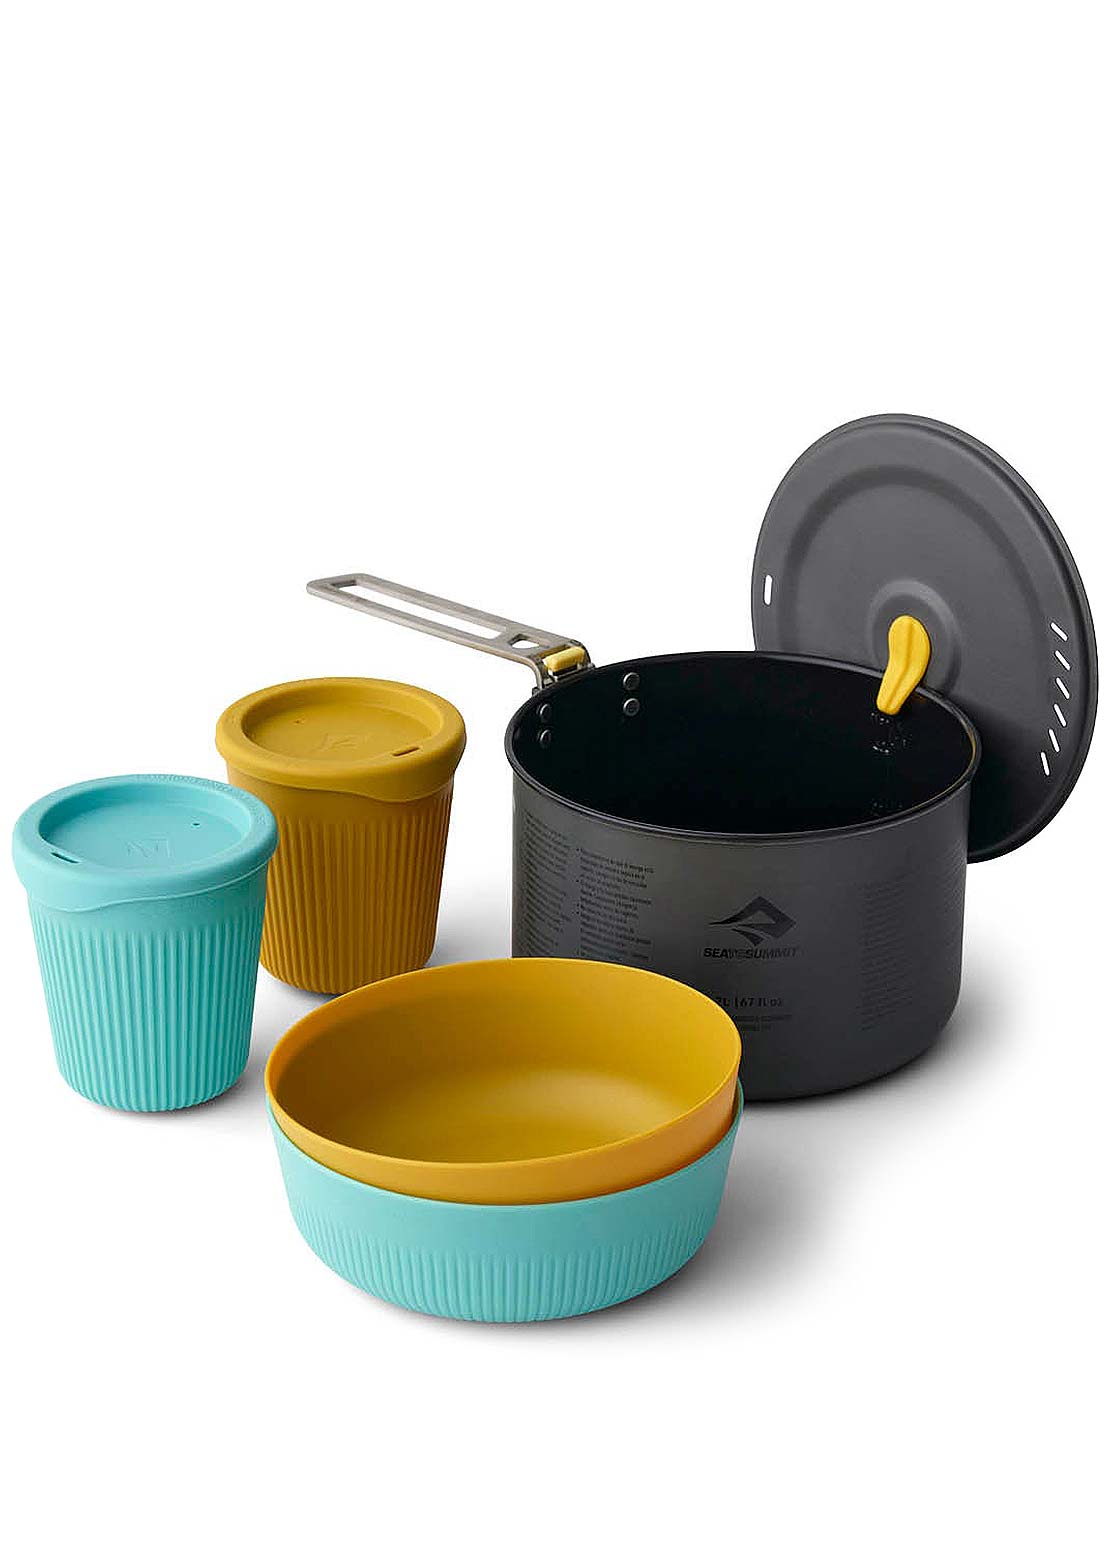 Sea To Summit Frontier UL One Pot Cook Set - 2 Person